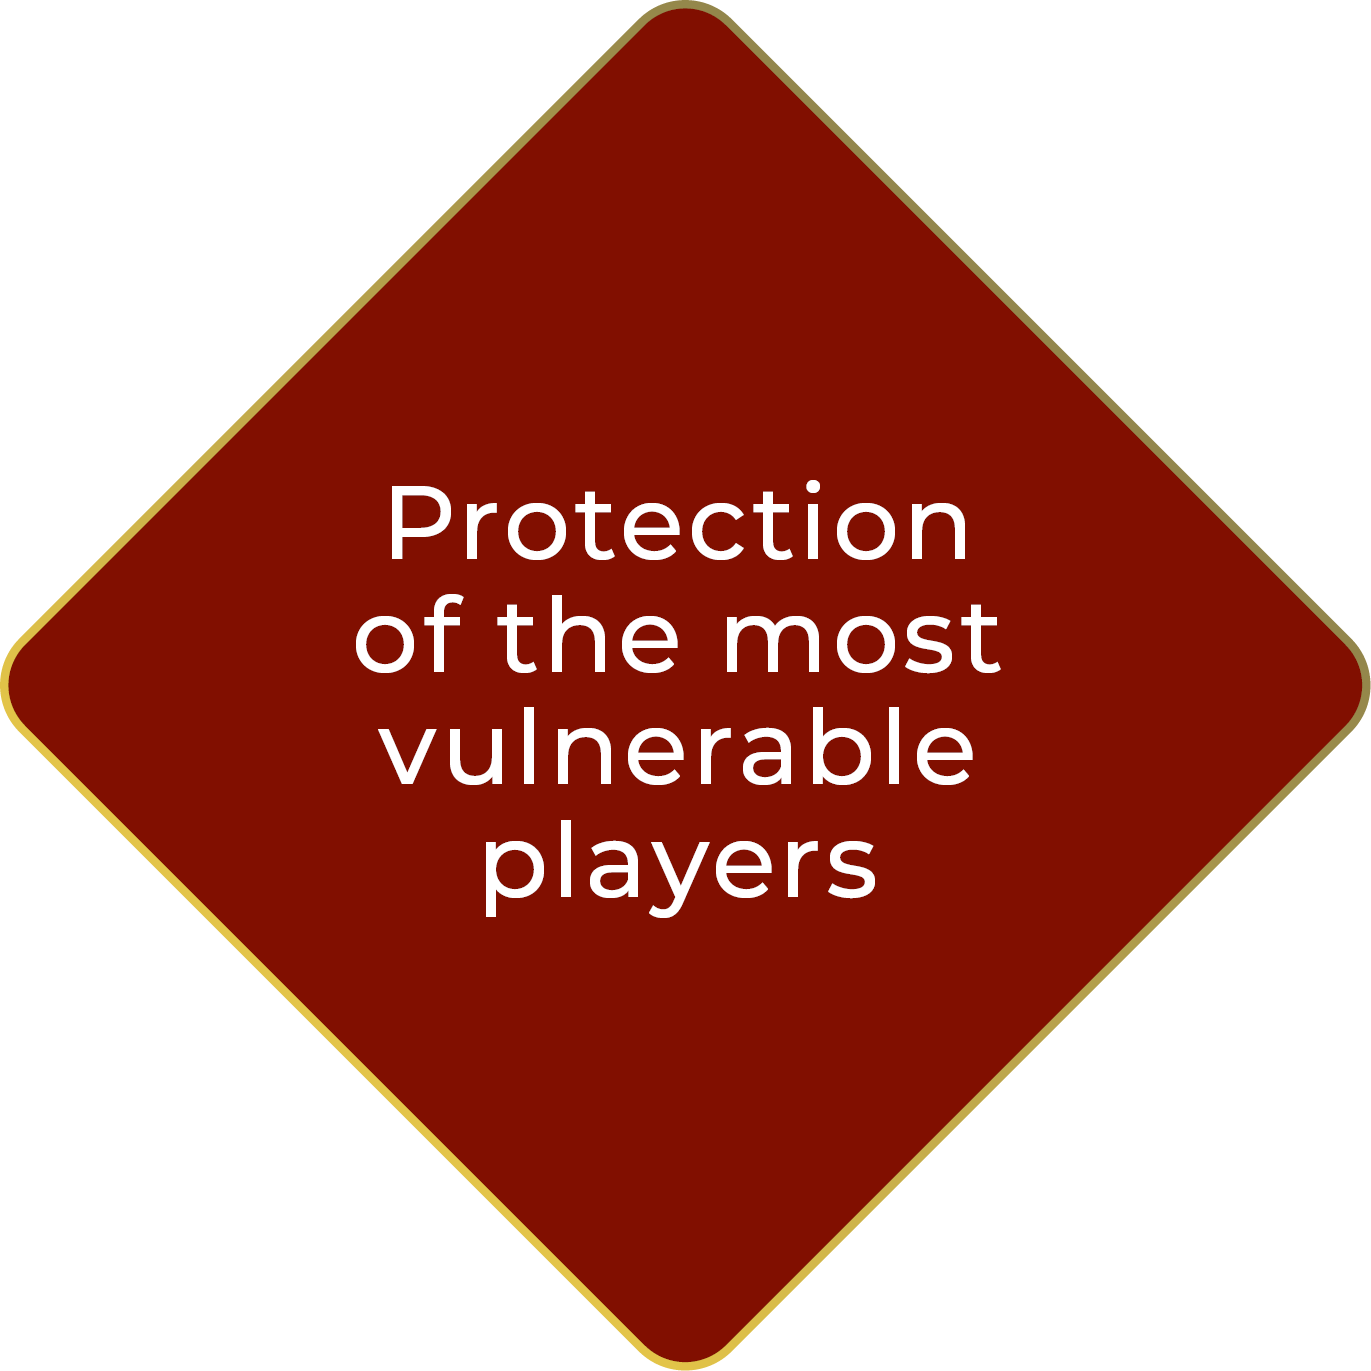 Protection of the most vulnerable players